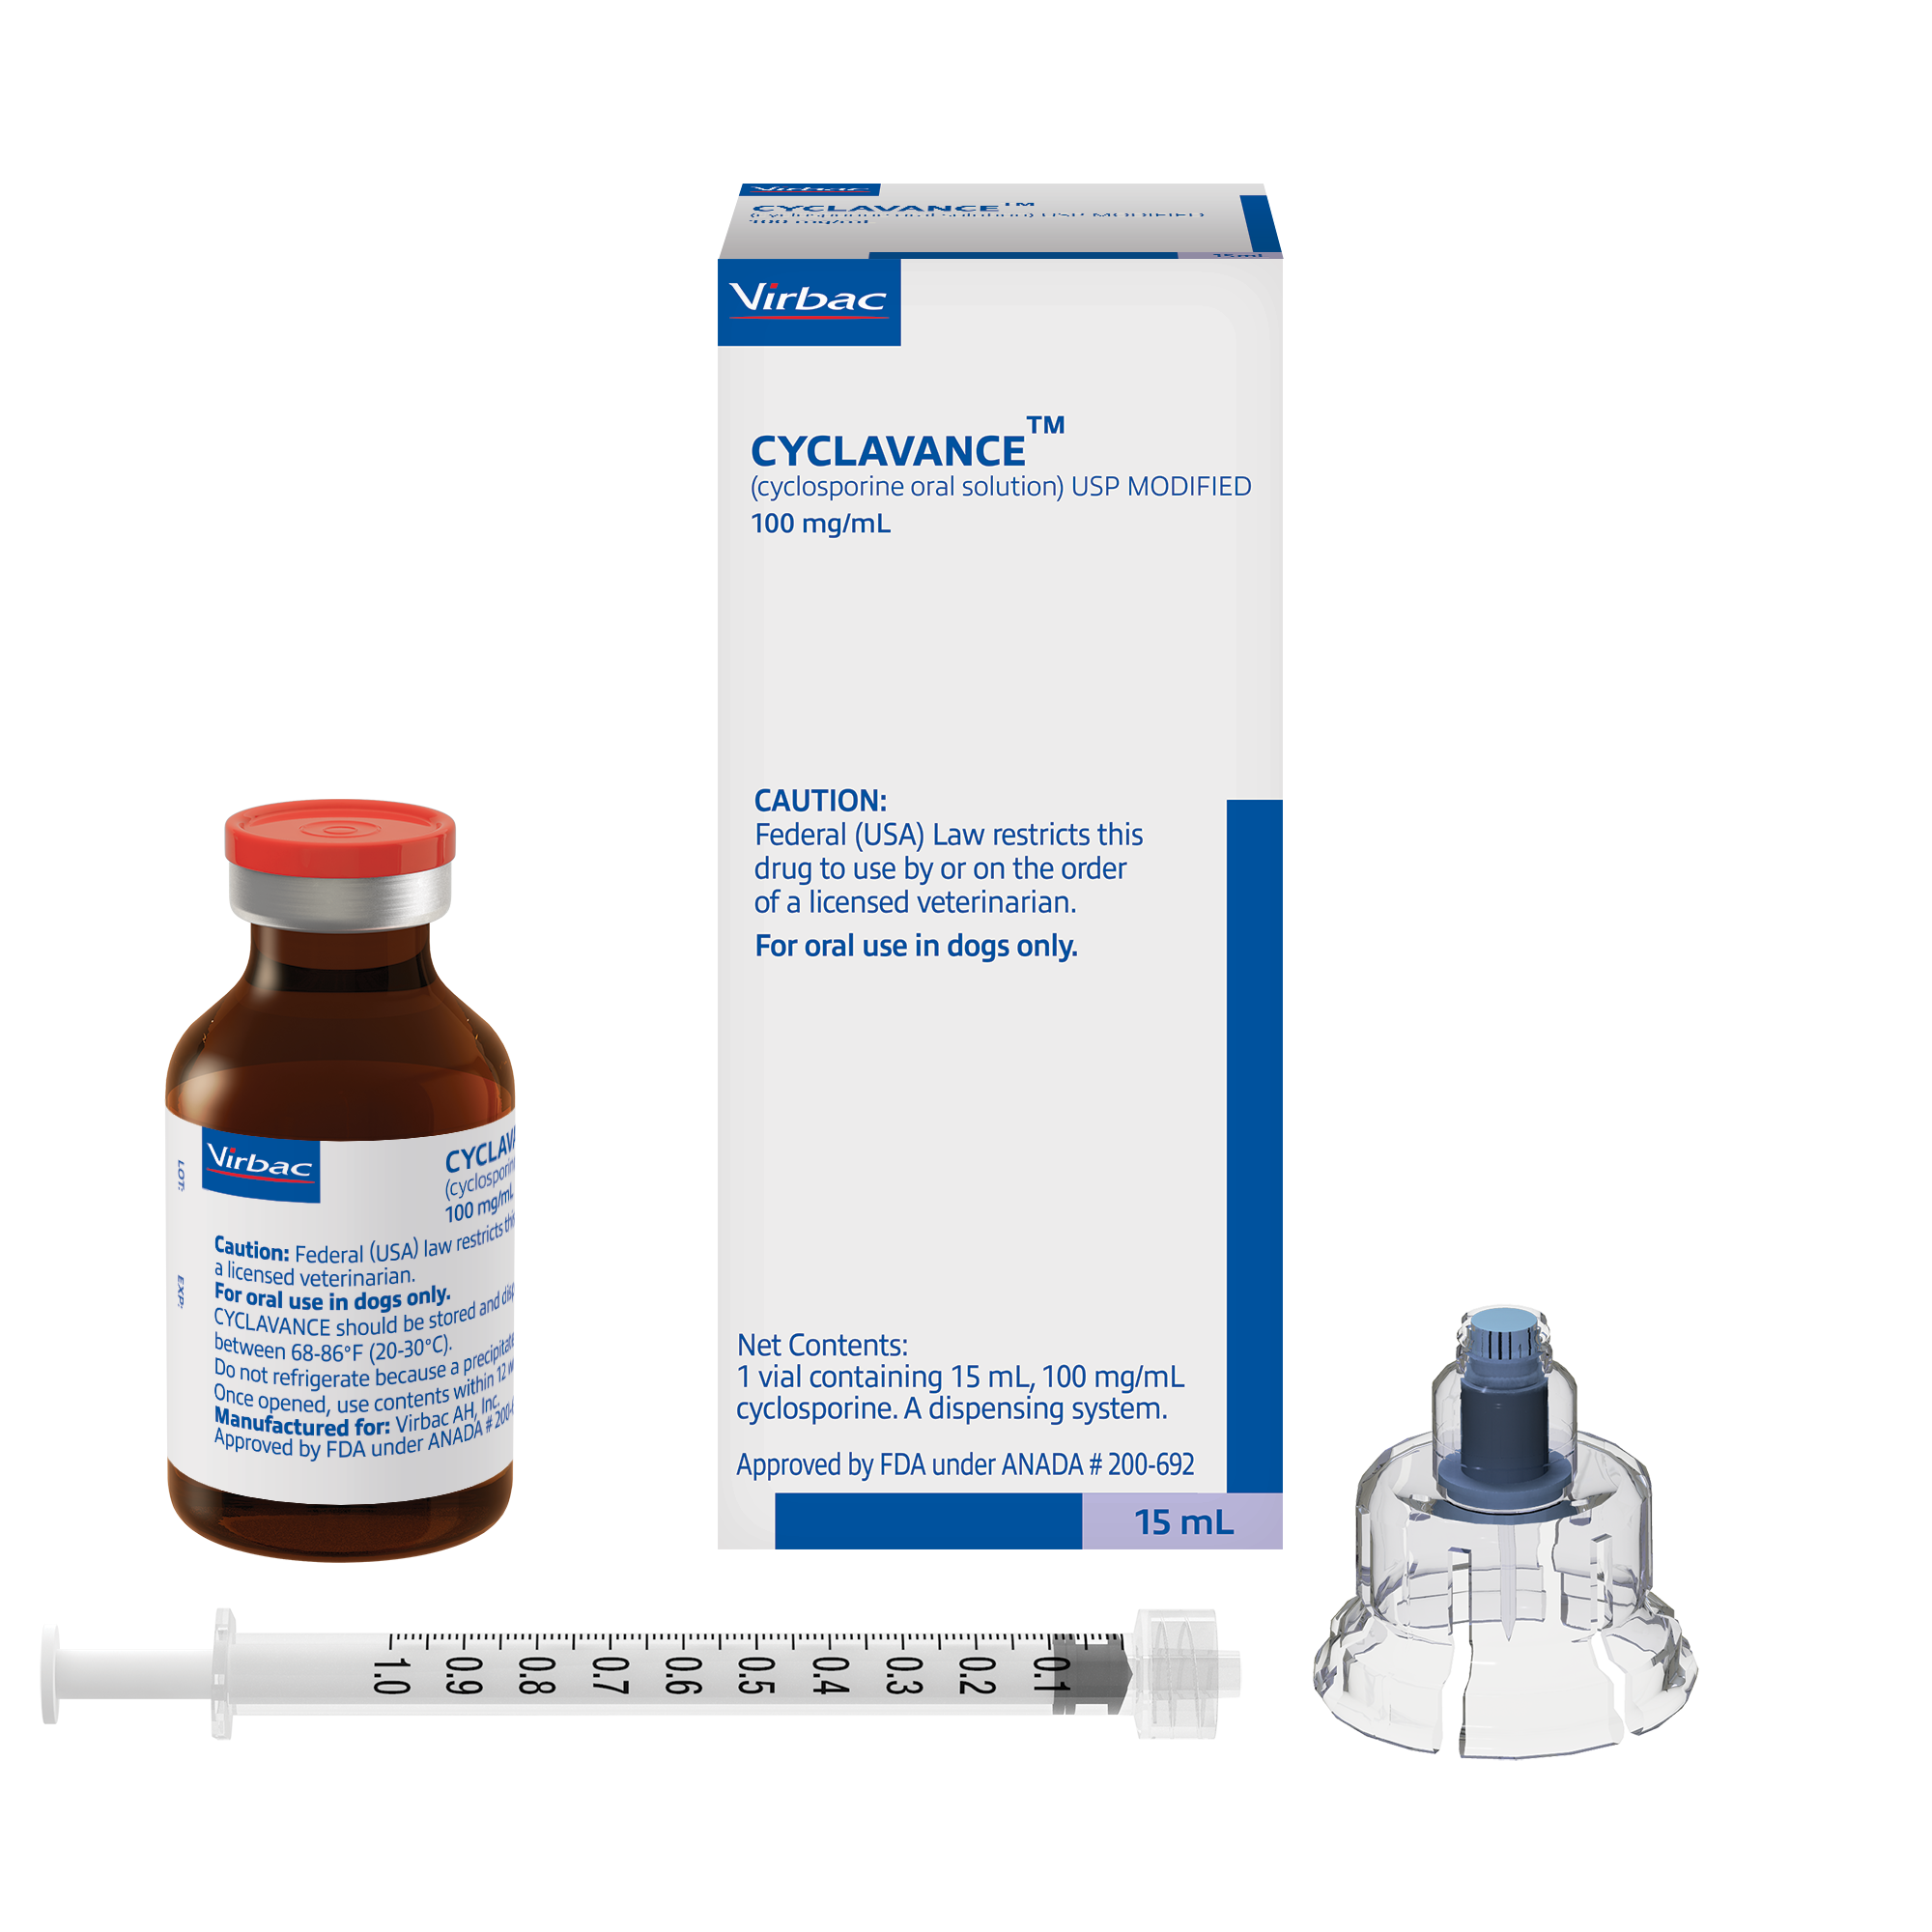 CYCLAVANCE™ (cyclosporine oral solution) USP MODIFIED for canine atopic  dermatitis now available